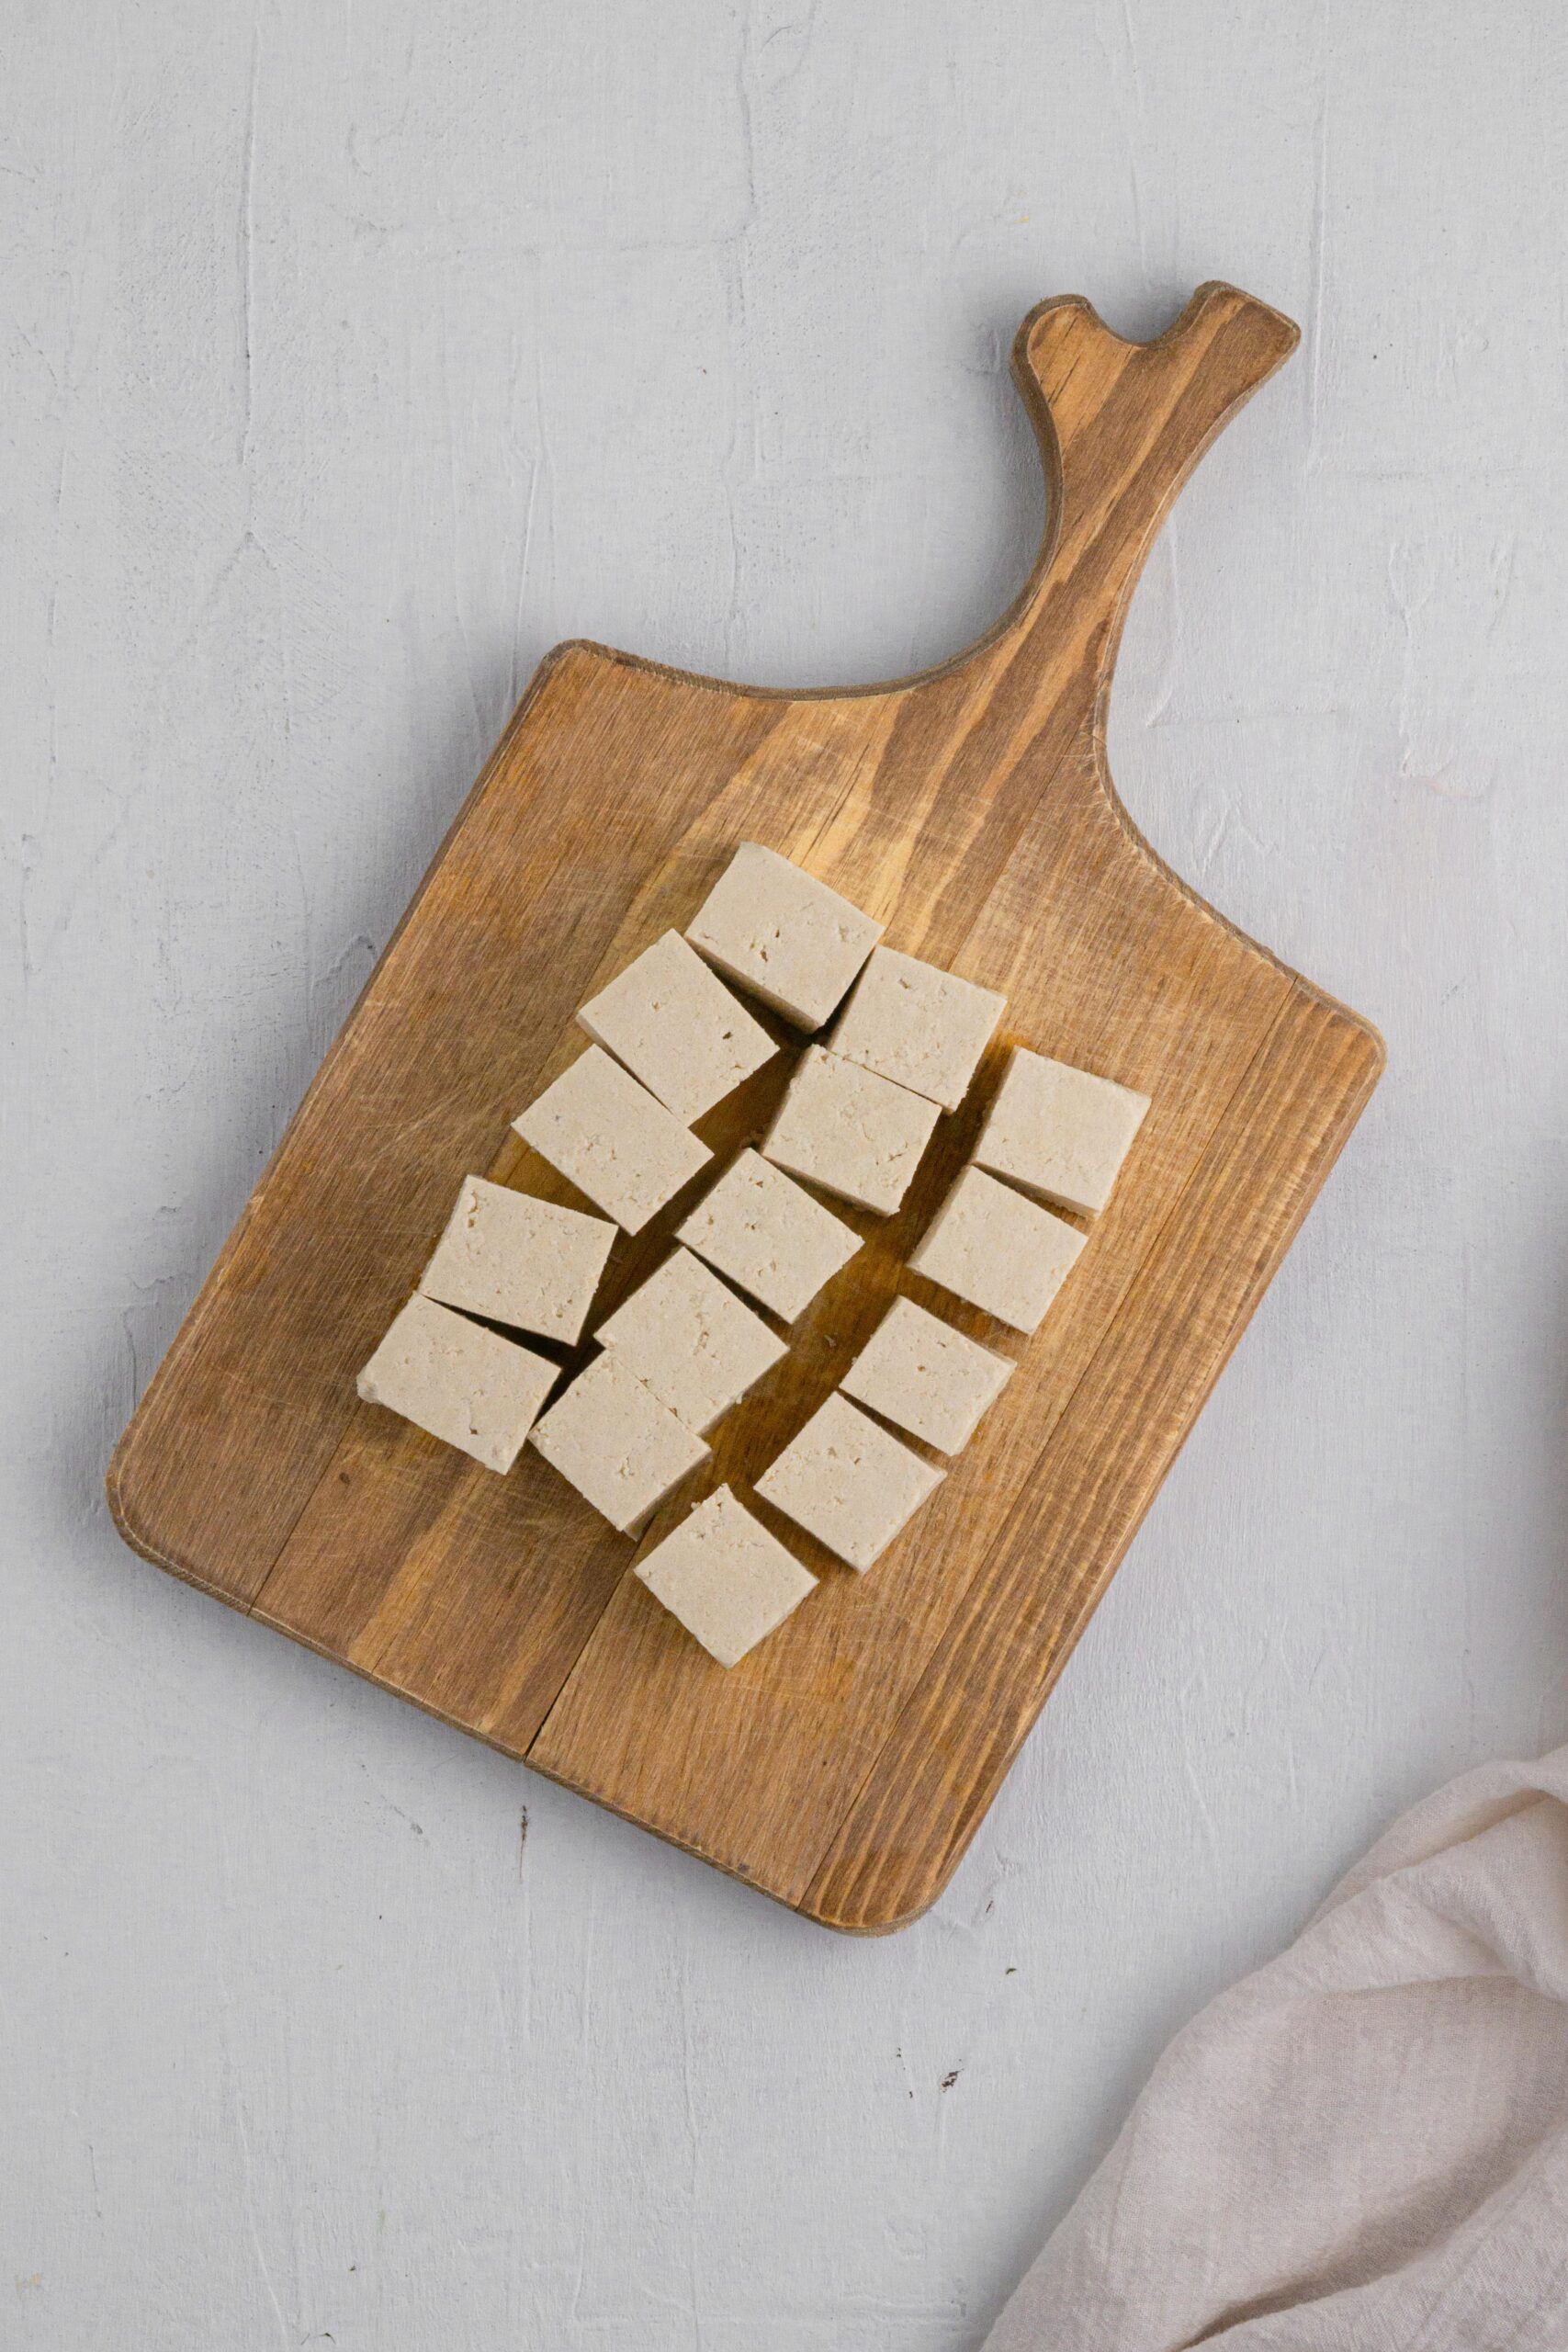 cubed tofuon a cutting board